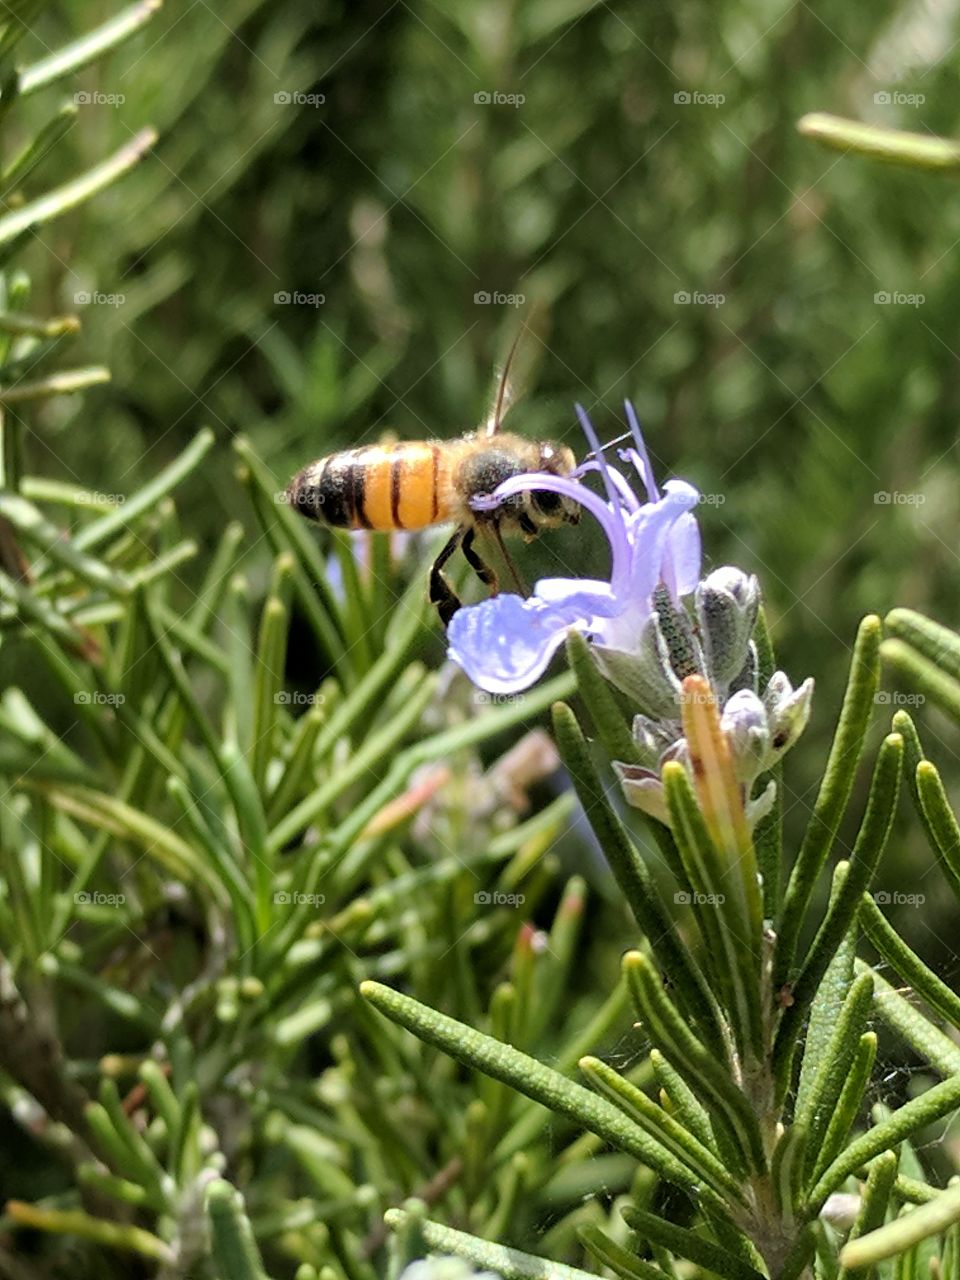 catching a bee pollinating some rosemary